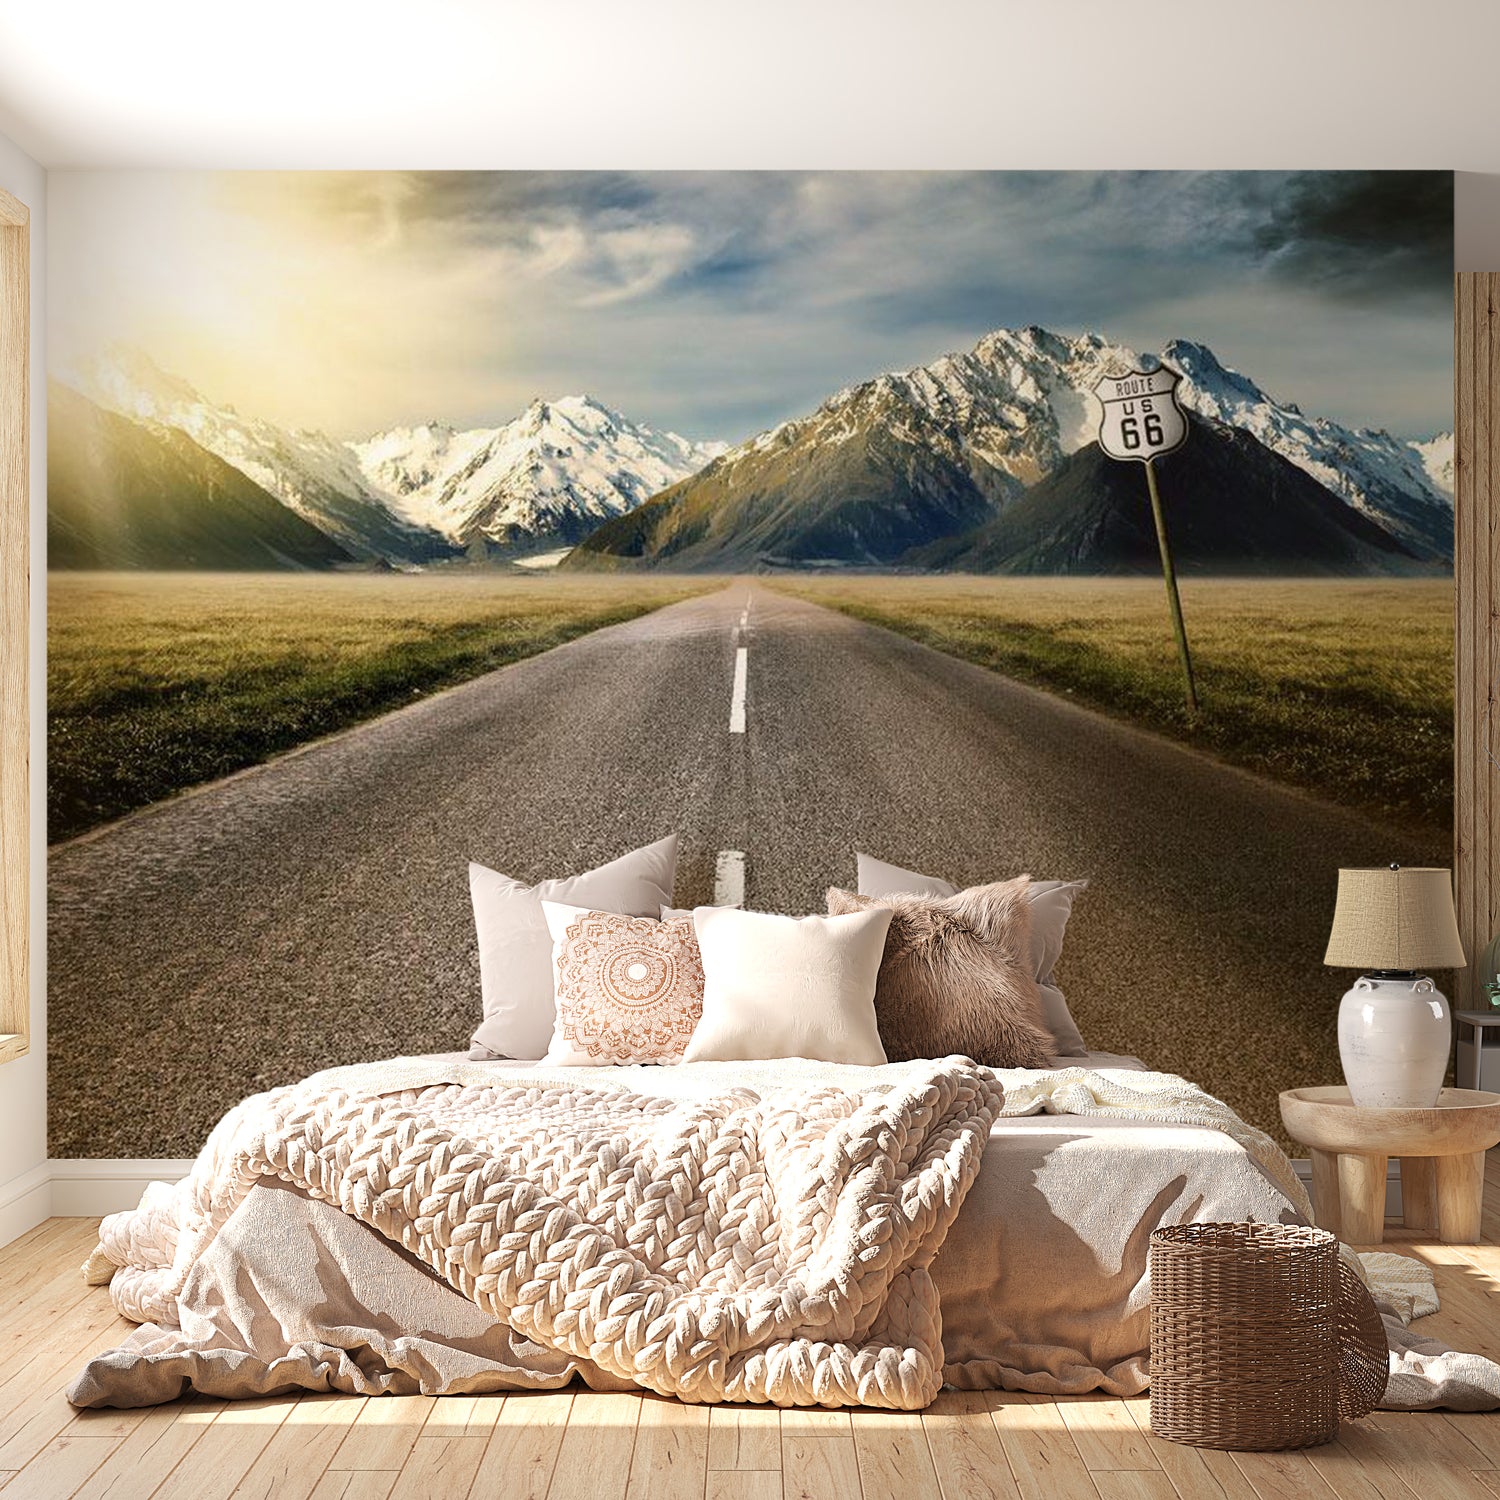 Peel & Stick Nature Wall Mural - The Long Road - Removable Wall Decals